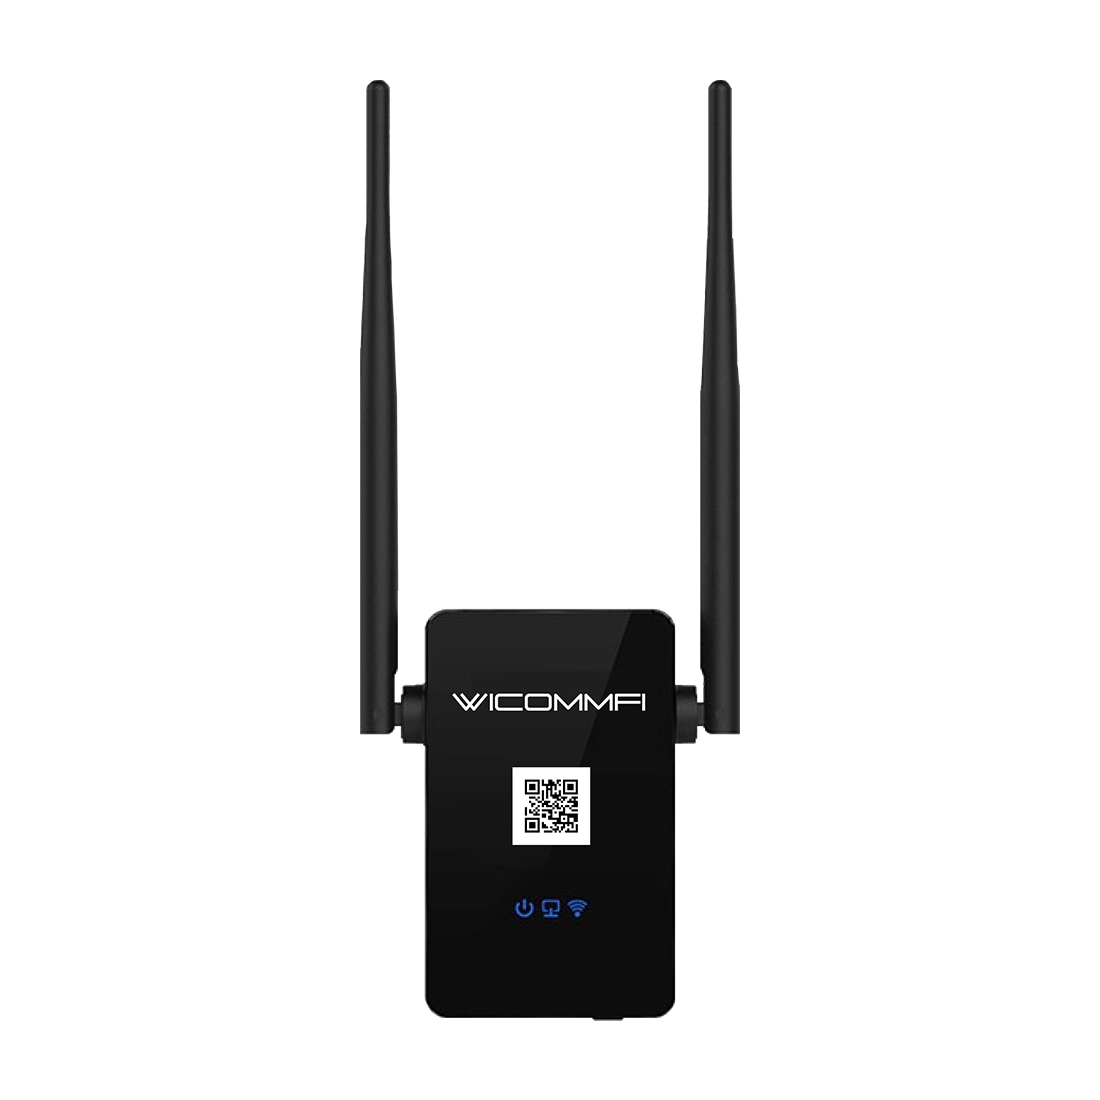 USMSRM US750 750Mbps WiFi Booster Wireless Wi-Fi Hotspot Mini Router AP Repeater Mode with 2 External Antennas 